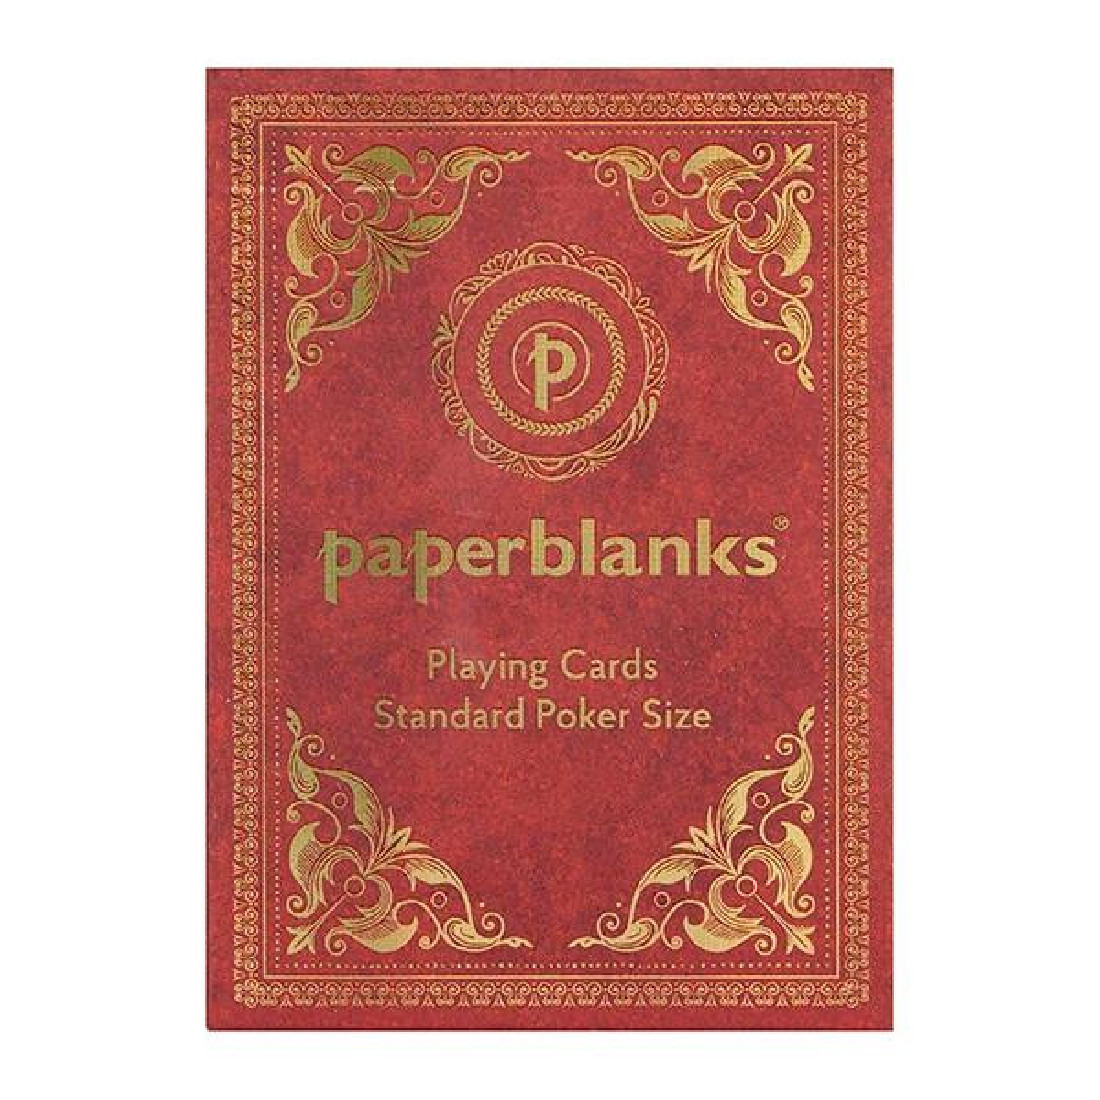 Paperblanks Playing Cards Golden Pathway